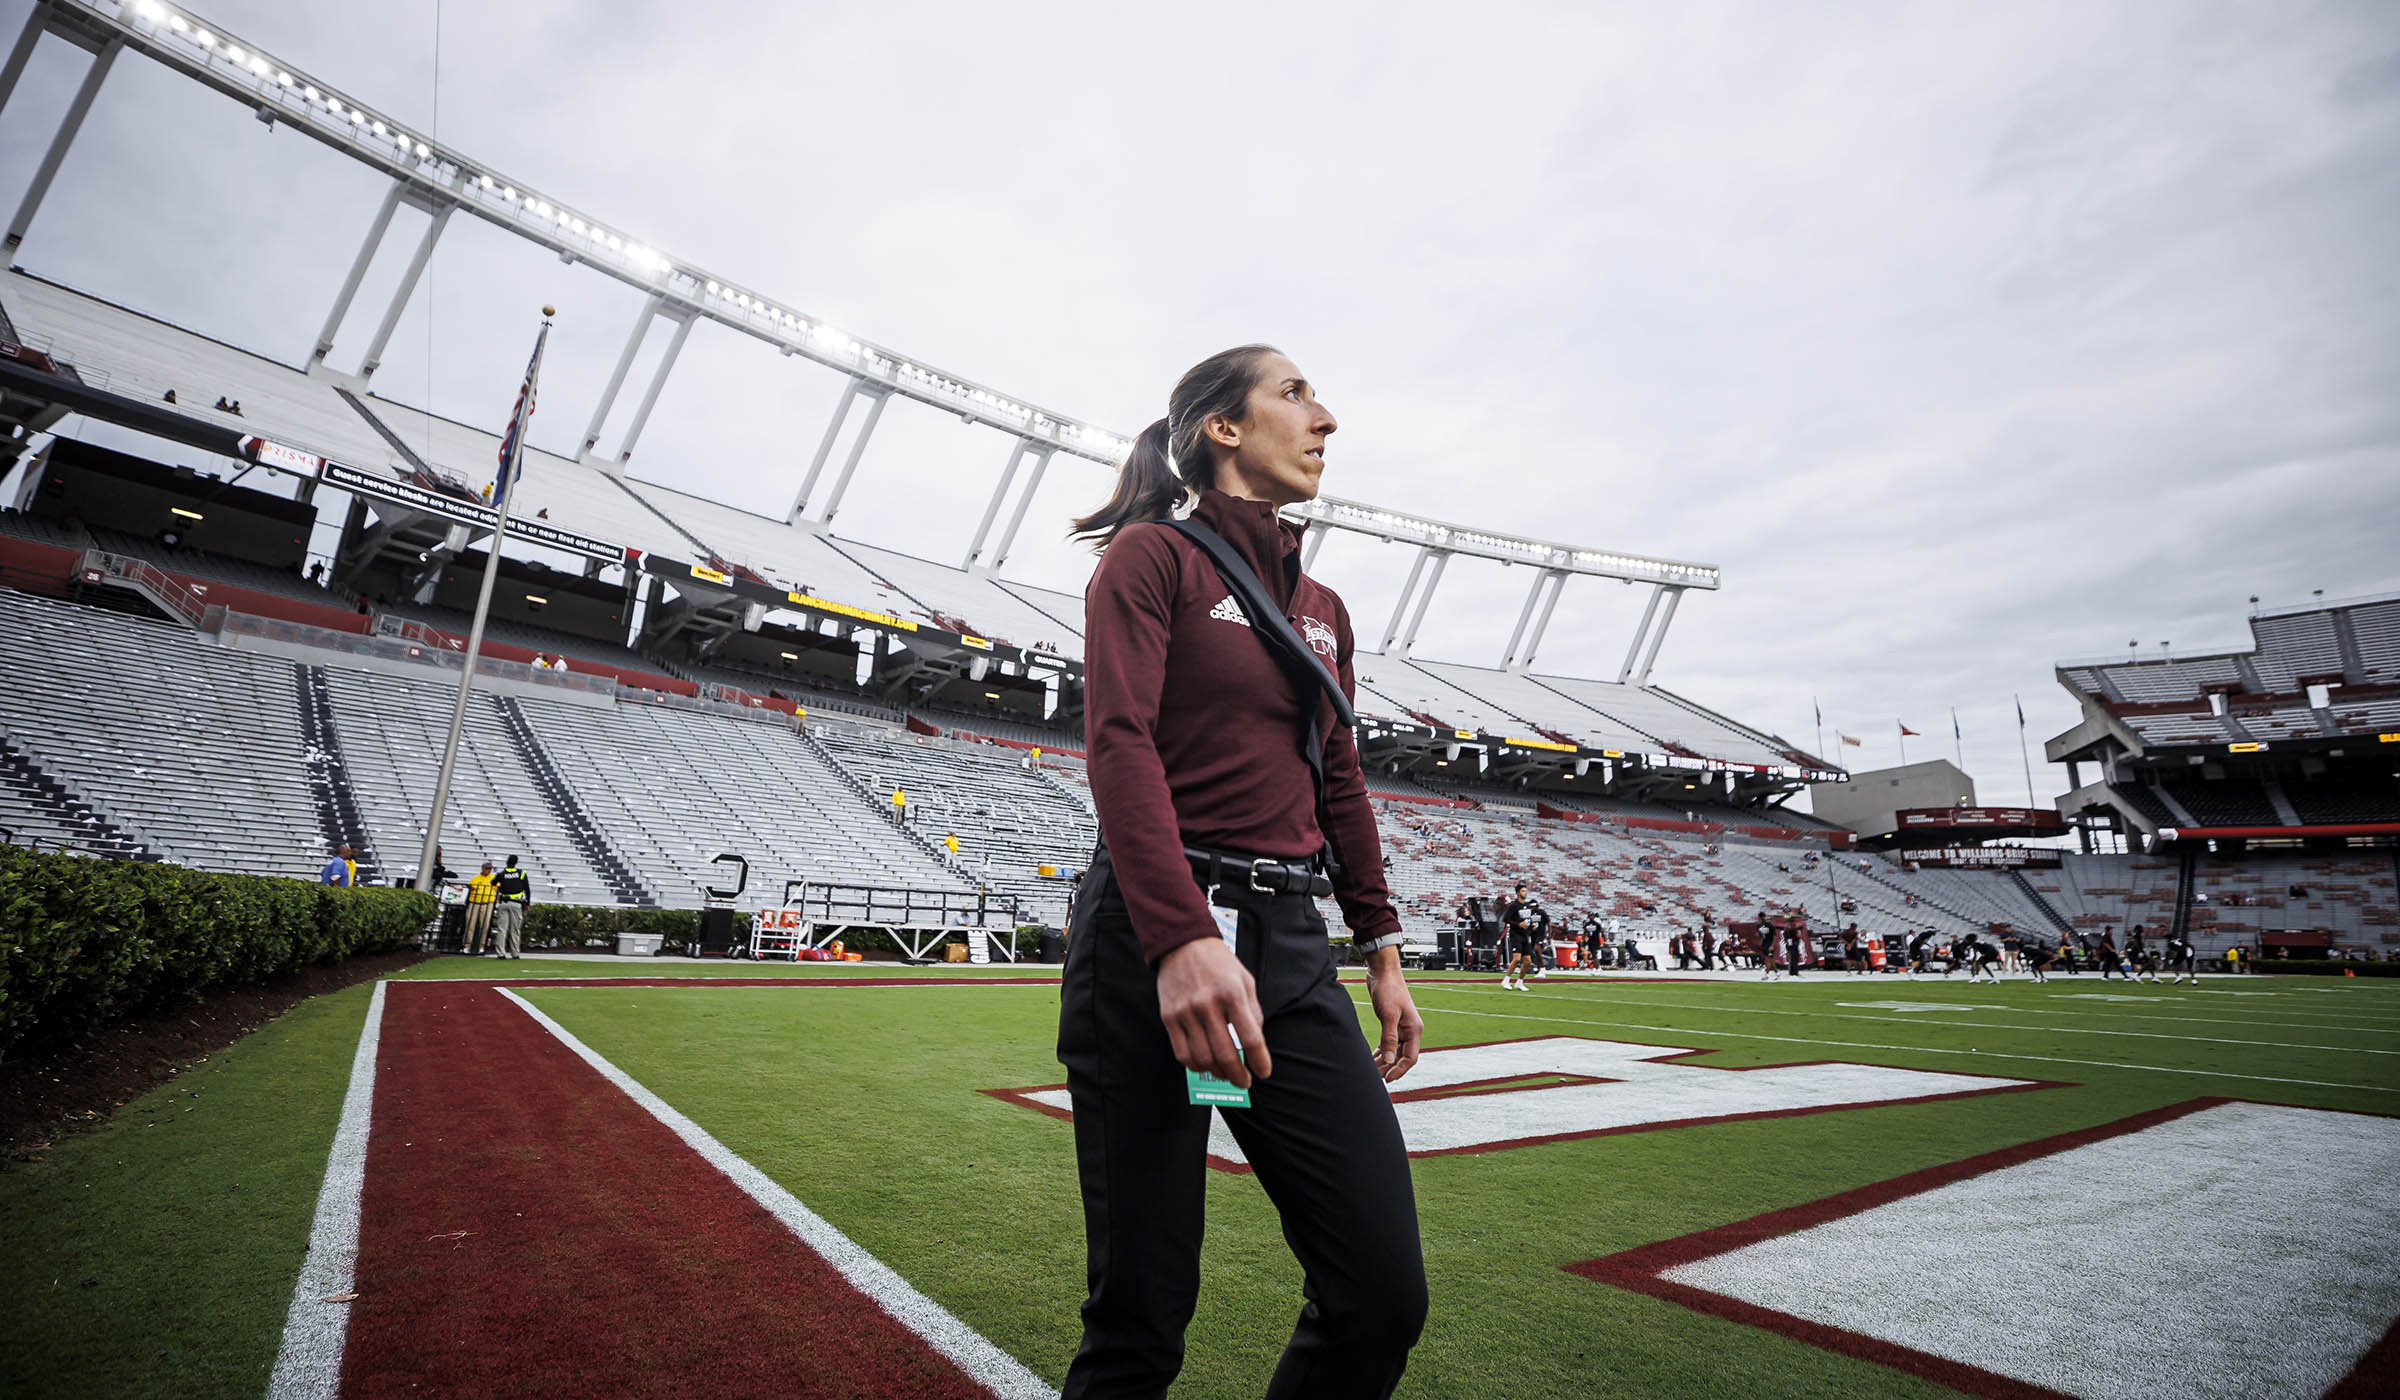 Pamela Bartz, pictured walking the sideline before an MSU football game